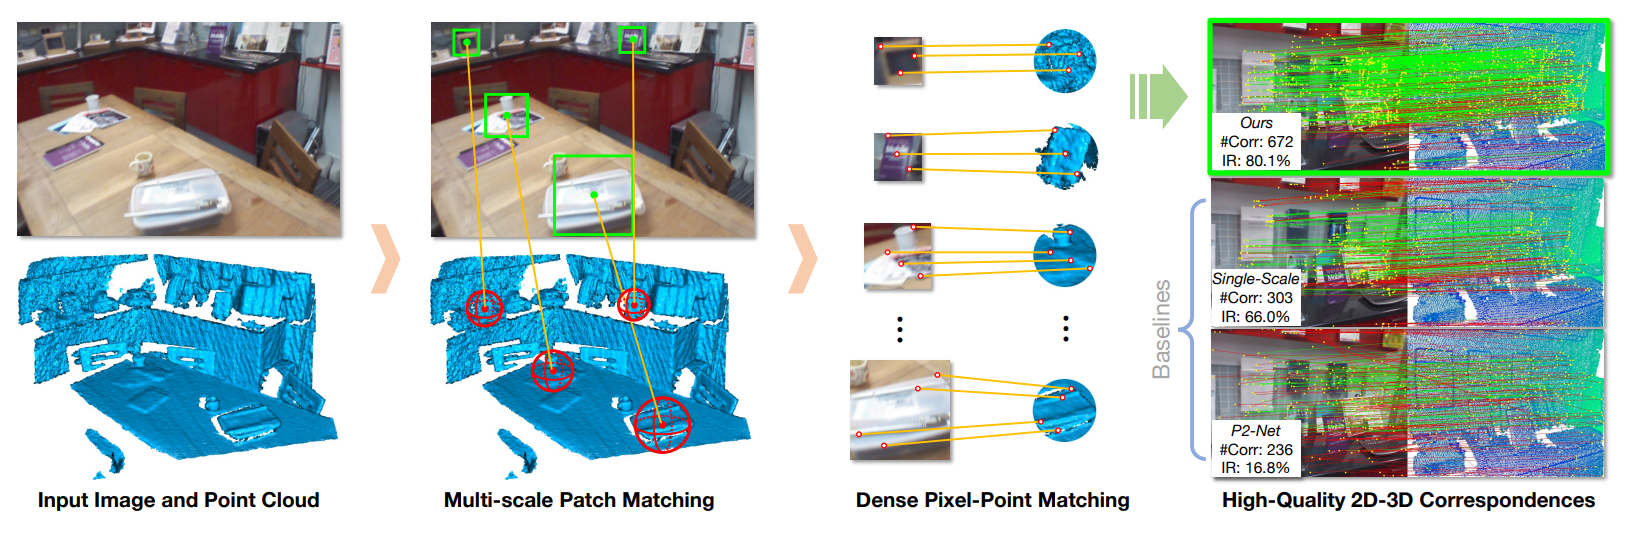 2D3D-MATR: 2D-3D Matching Transformer for Detection-free Registration between Images and Point Clouds